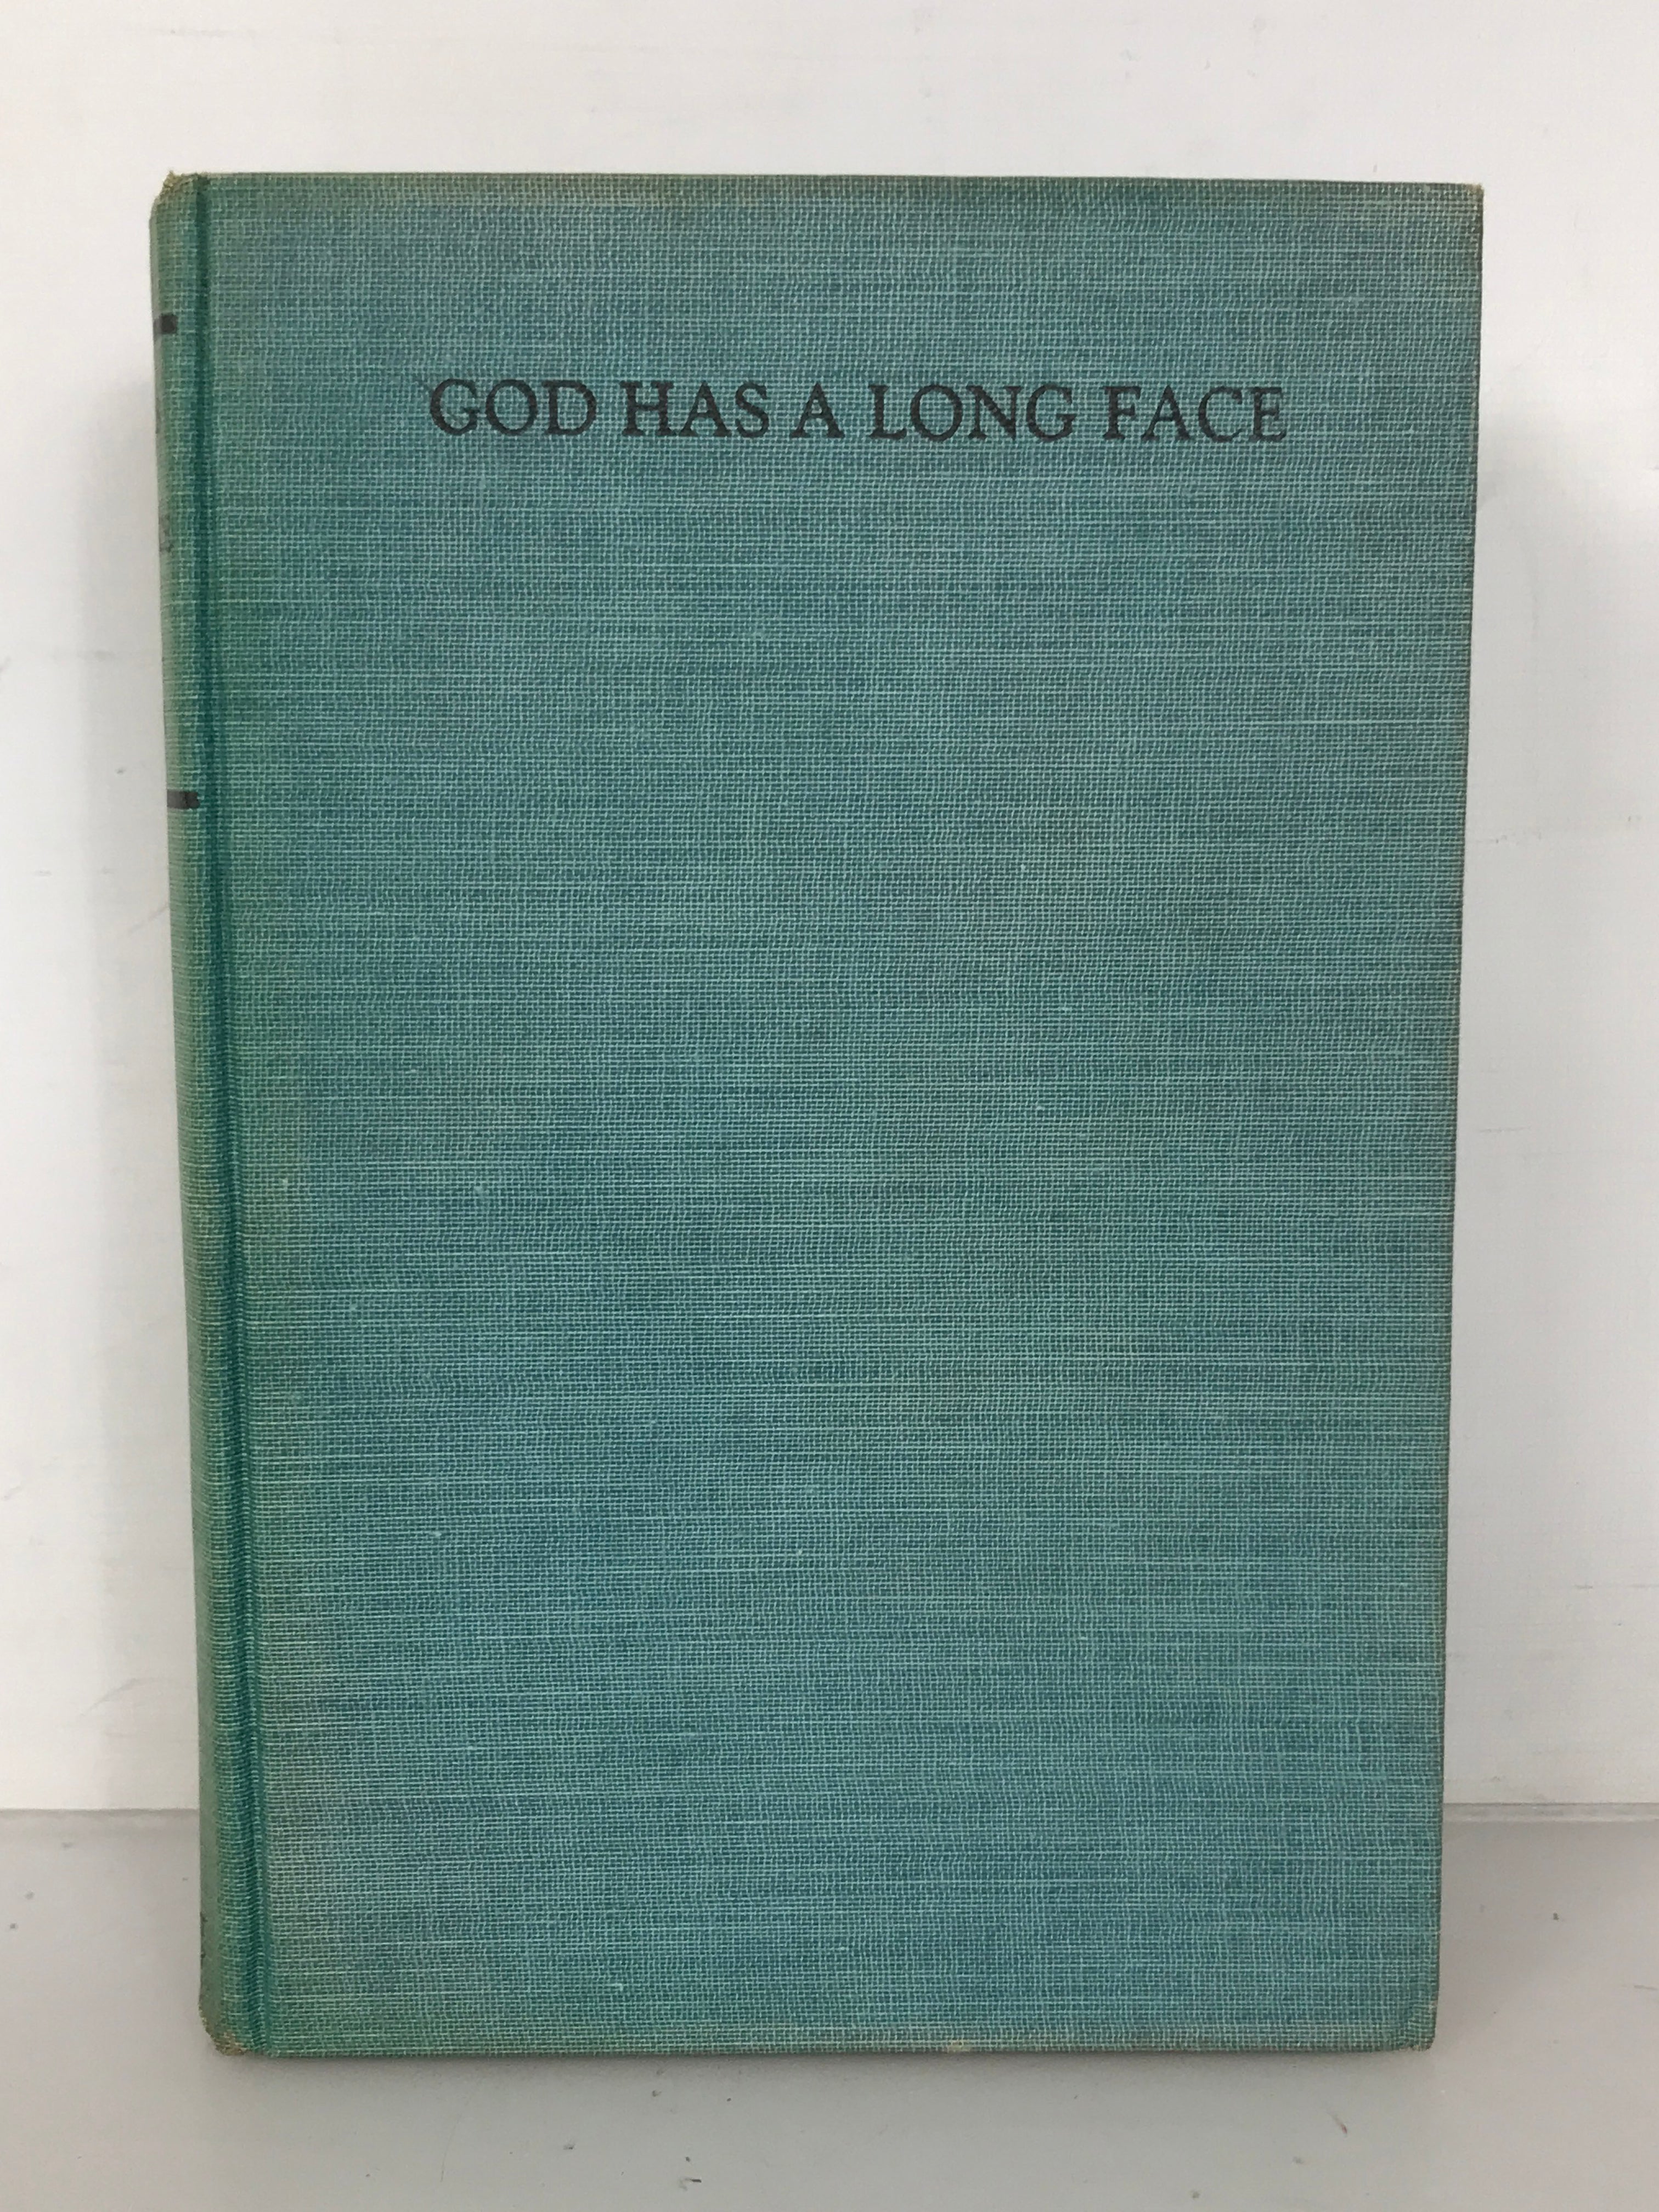 Vintage Copy of God Has a Long Face by Robert Wilder 1940 HC